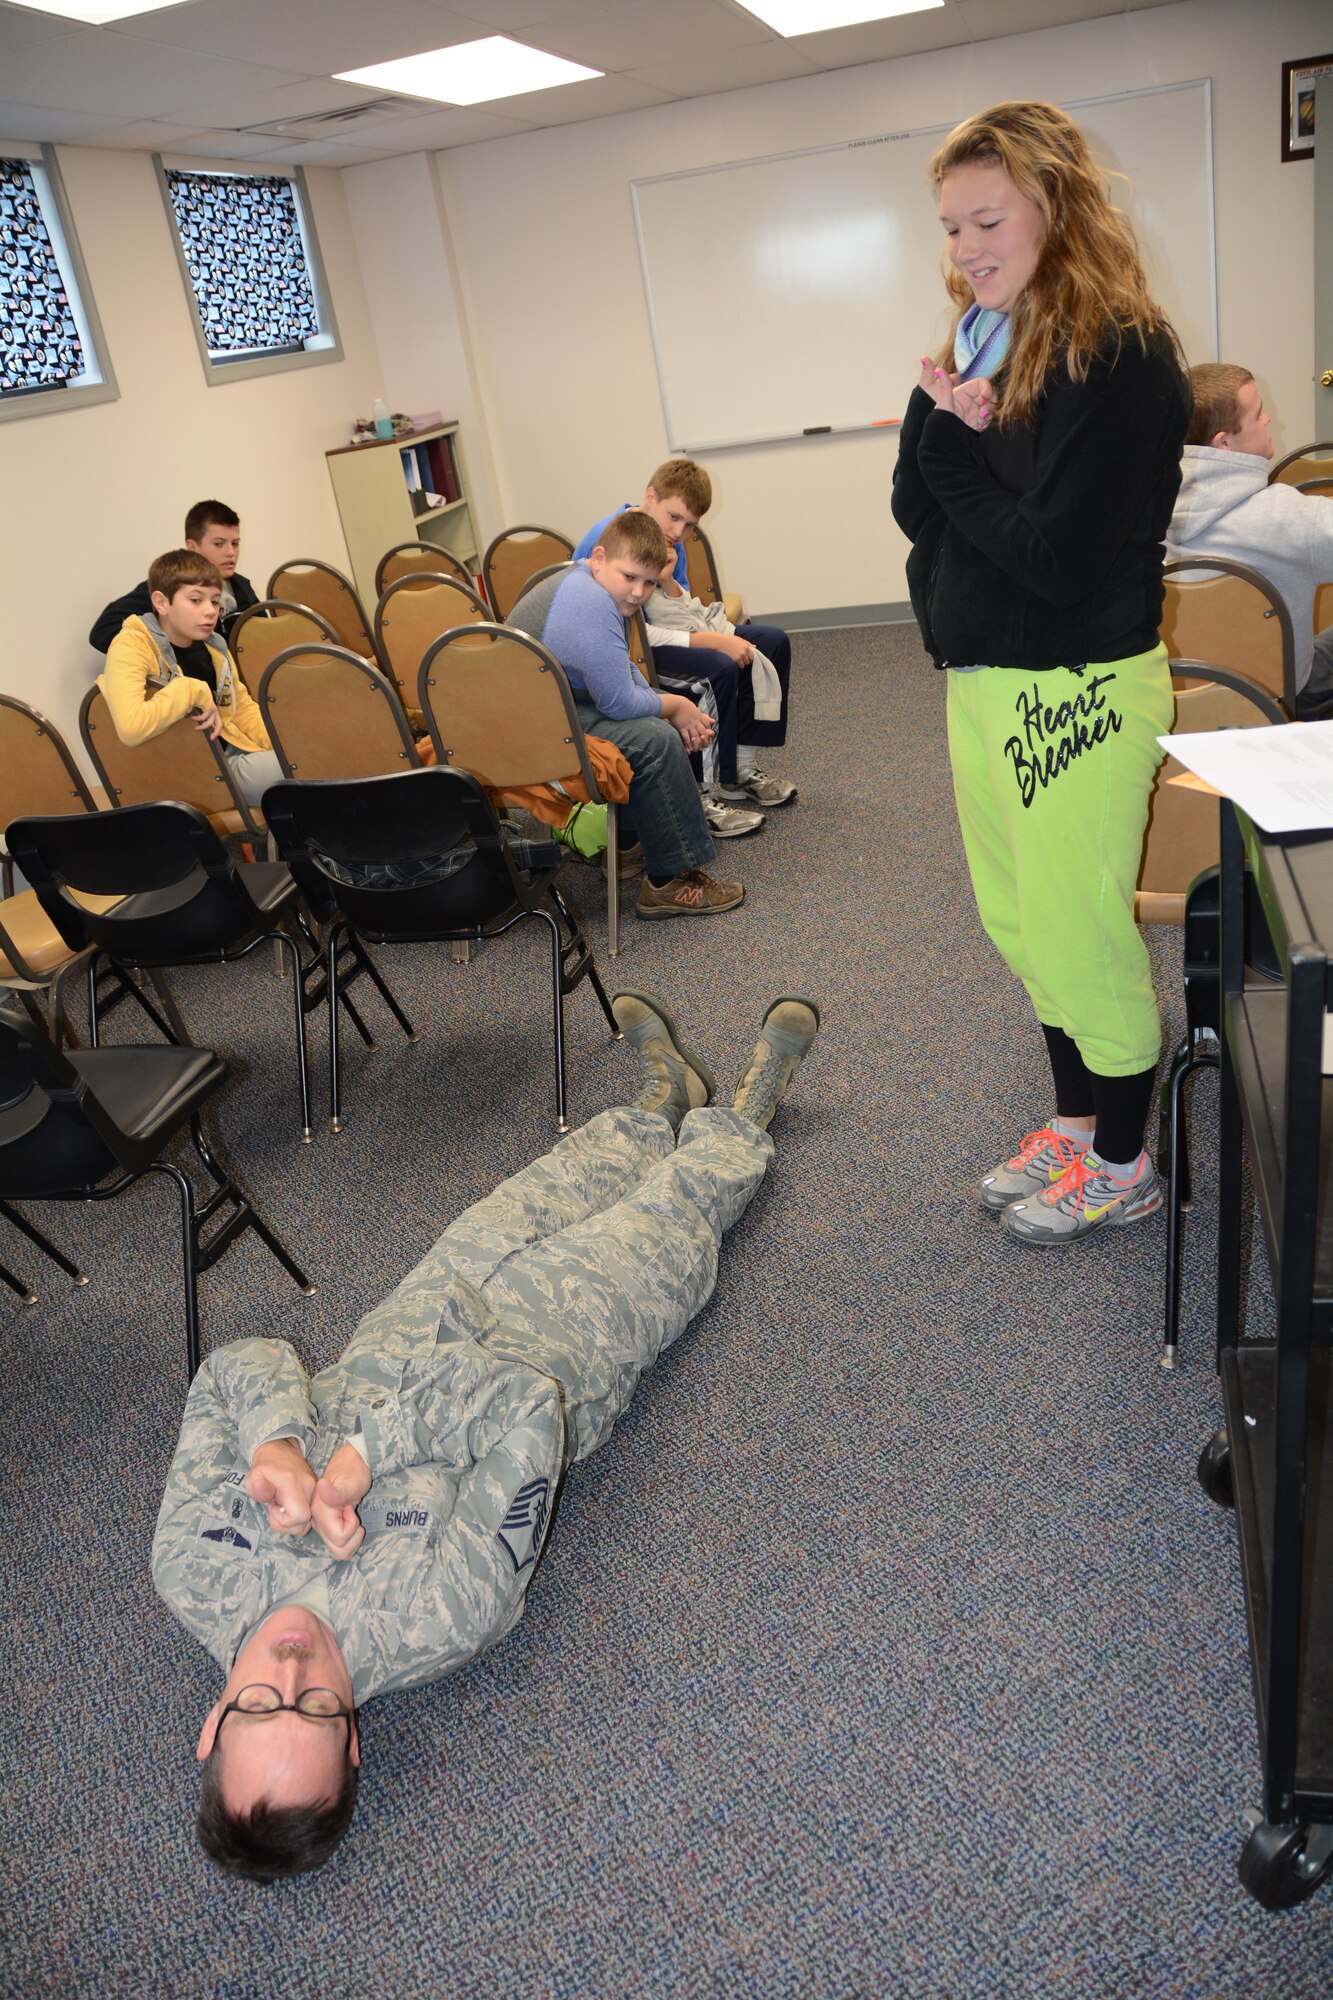 Master Sgt. Robert Burns, 512th Aerospace Medicine Squadron, demonstrates for Delaware Civil Air Patrol cadet Brianna Boyd, how to play a victim who has had serious head trauma during a training exercise Nov. 2, 2014, at Dover Air Force Base, Del. To assist the 512th AMDS in the training exercise, she and several other cadets were dressed with prosthetics and fake blood that simulated various injuries, including punctured eyes, open bone fractures and lacerations. (U.S. Air Force photo/Senior Airman Joe Yanik)  